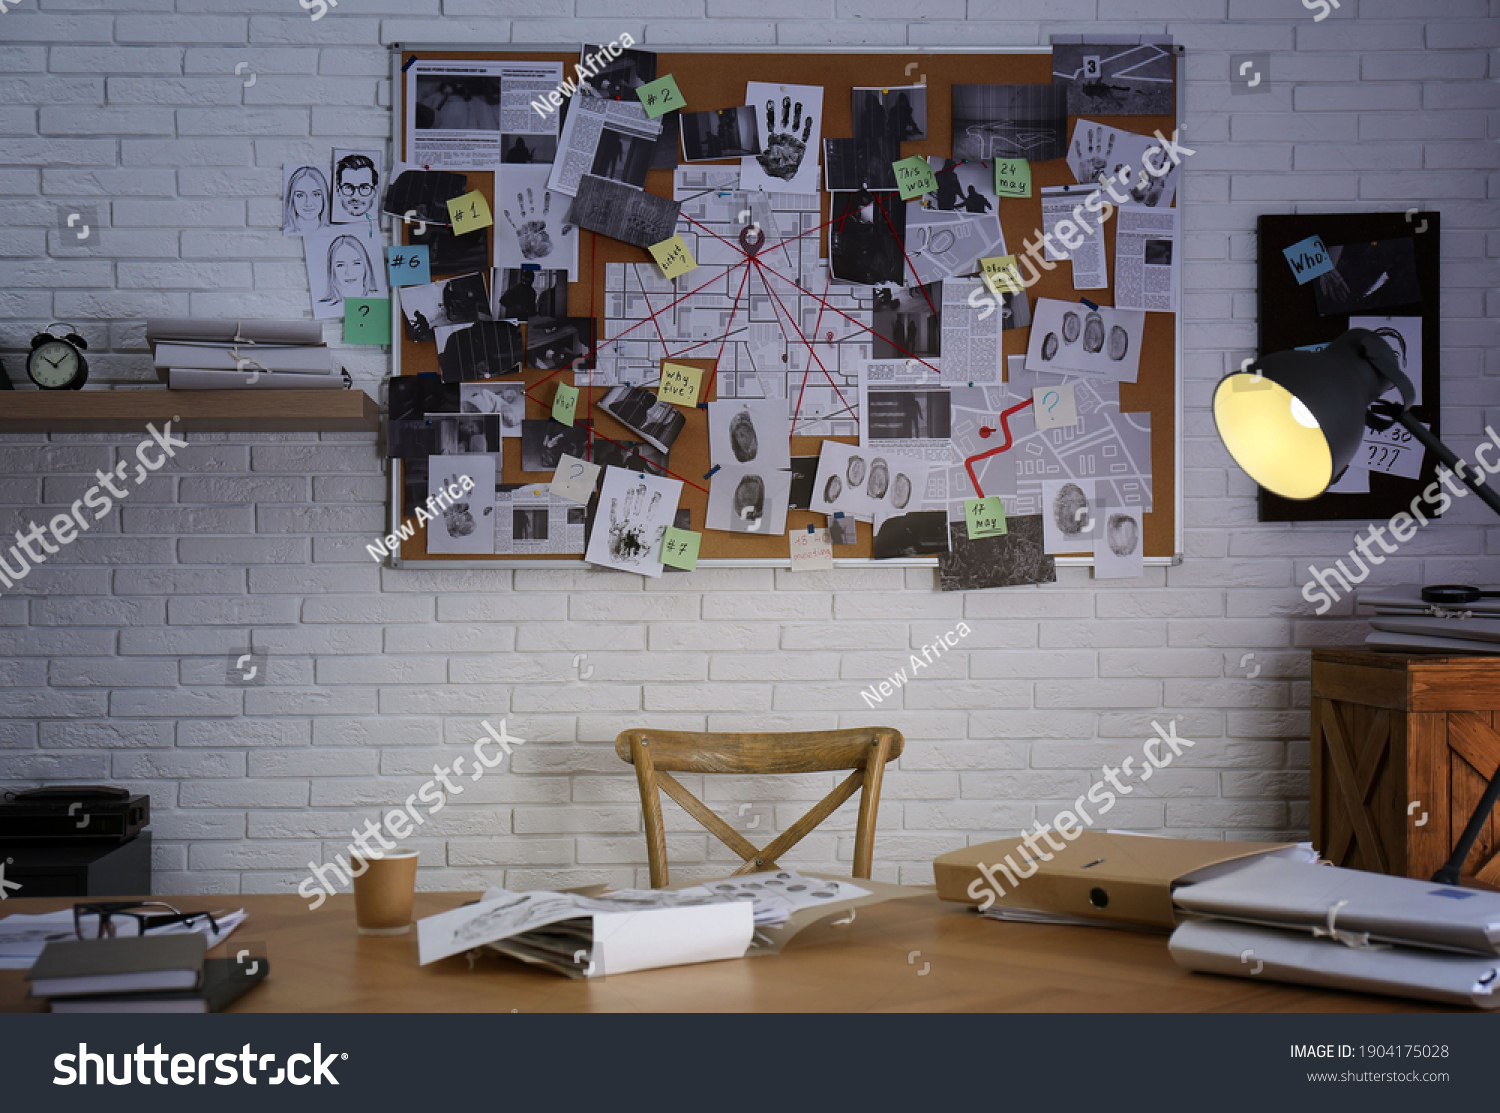 28,503 Investigation in office Images, Stock Photos & Vectors ...